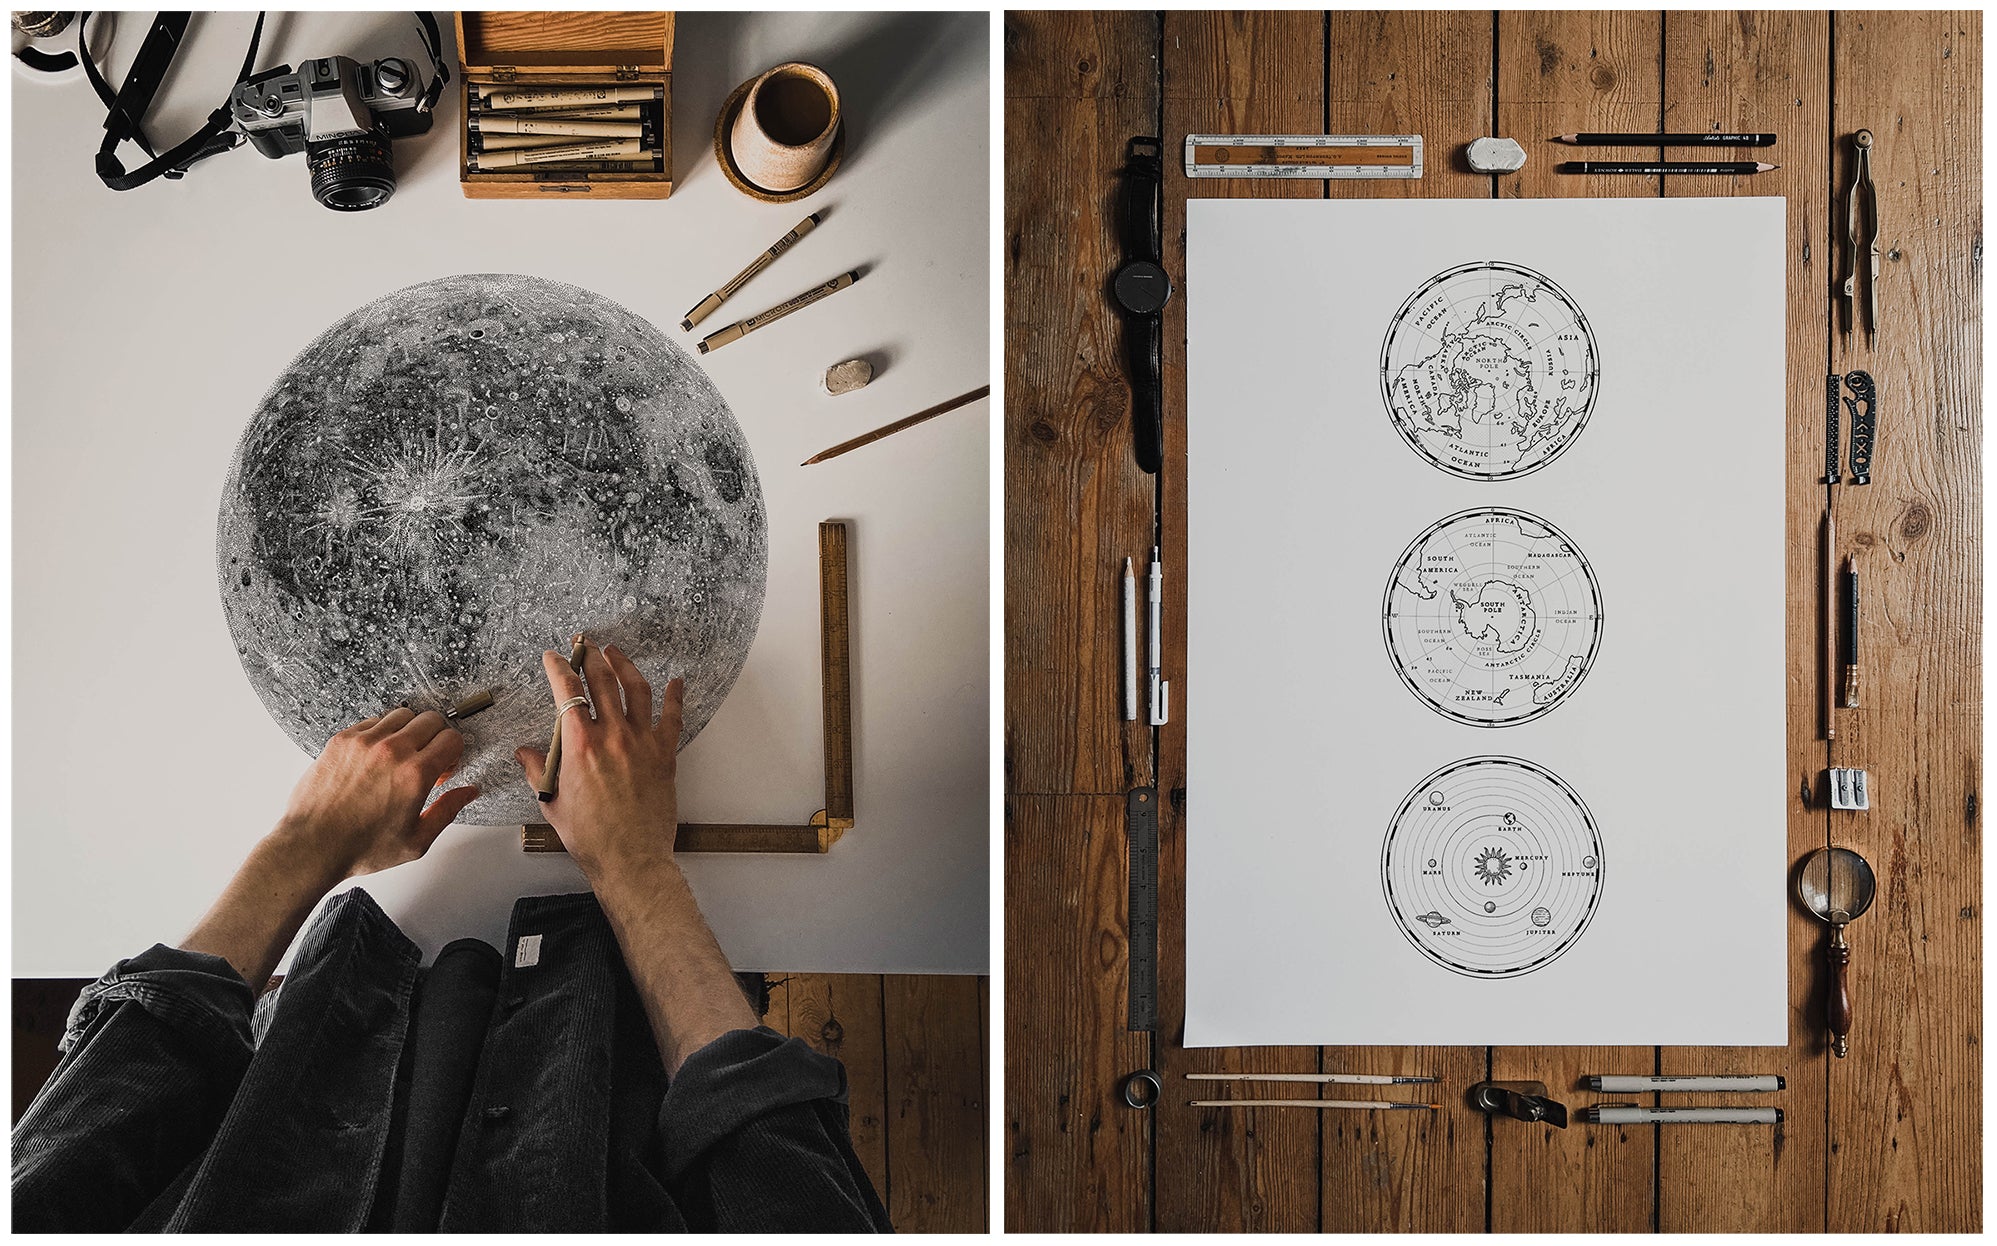 Most of Lást Maps’ work is inspired by the natural world – and adventures through it